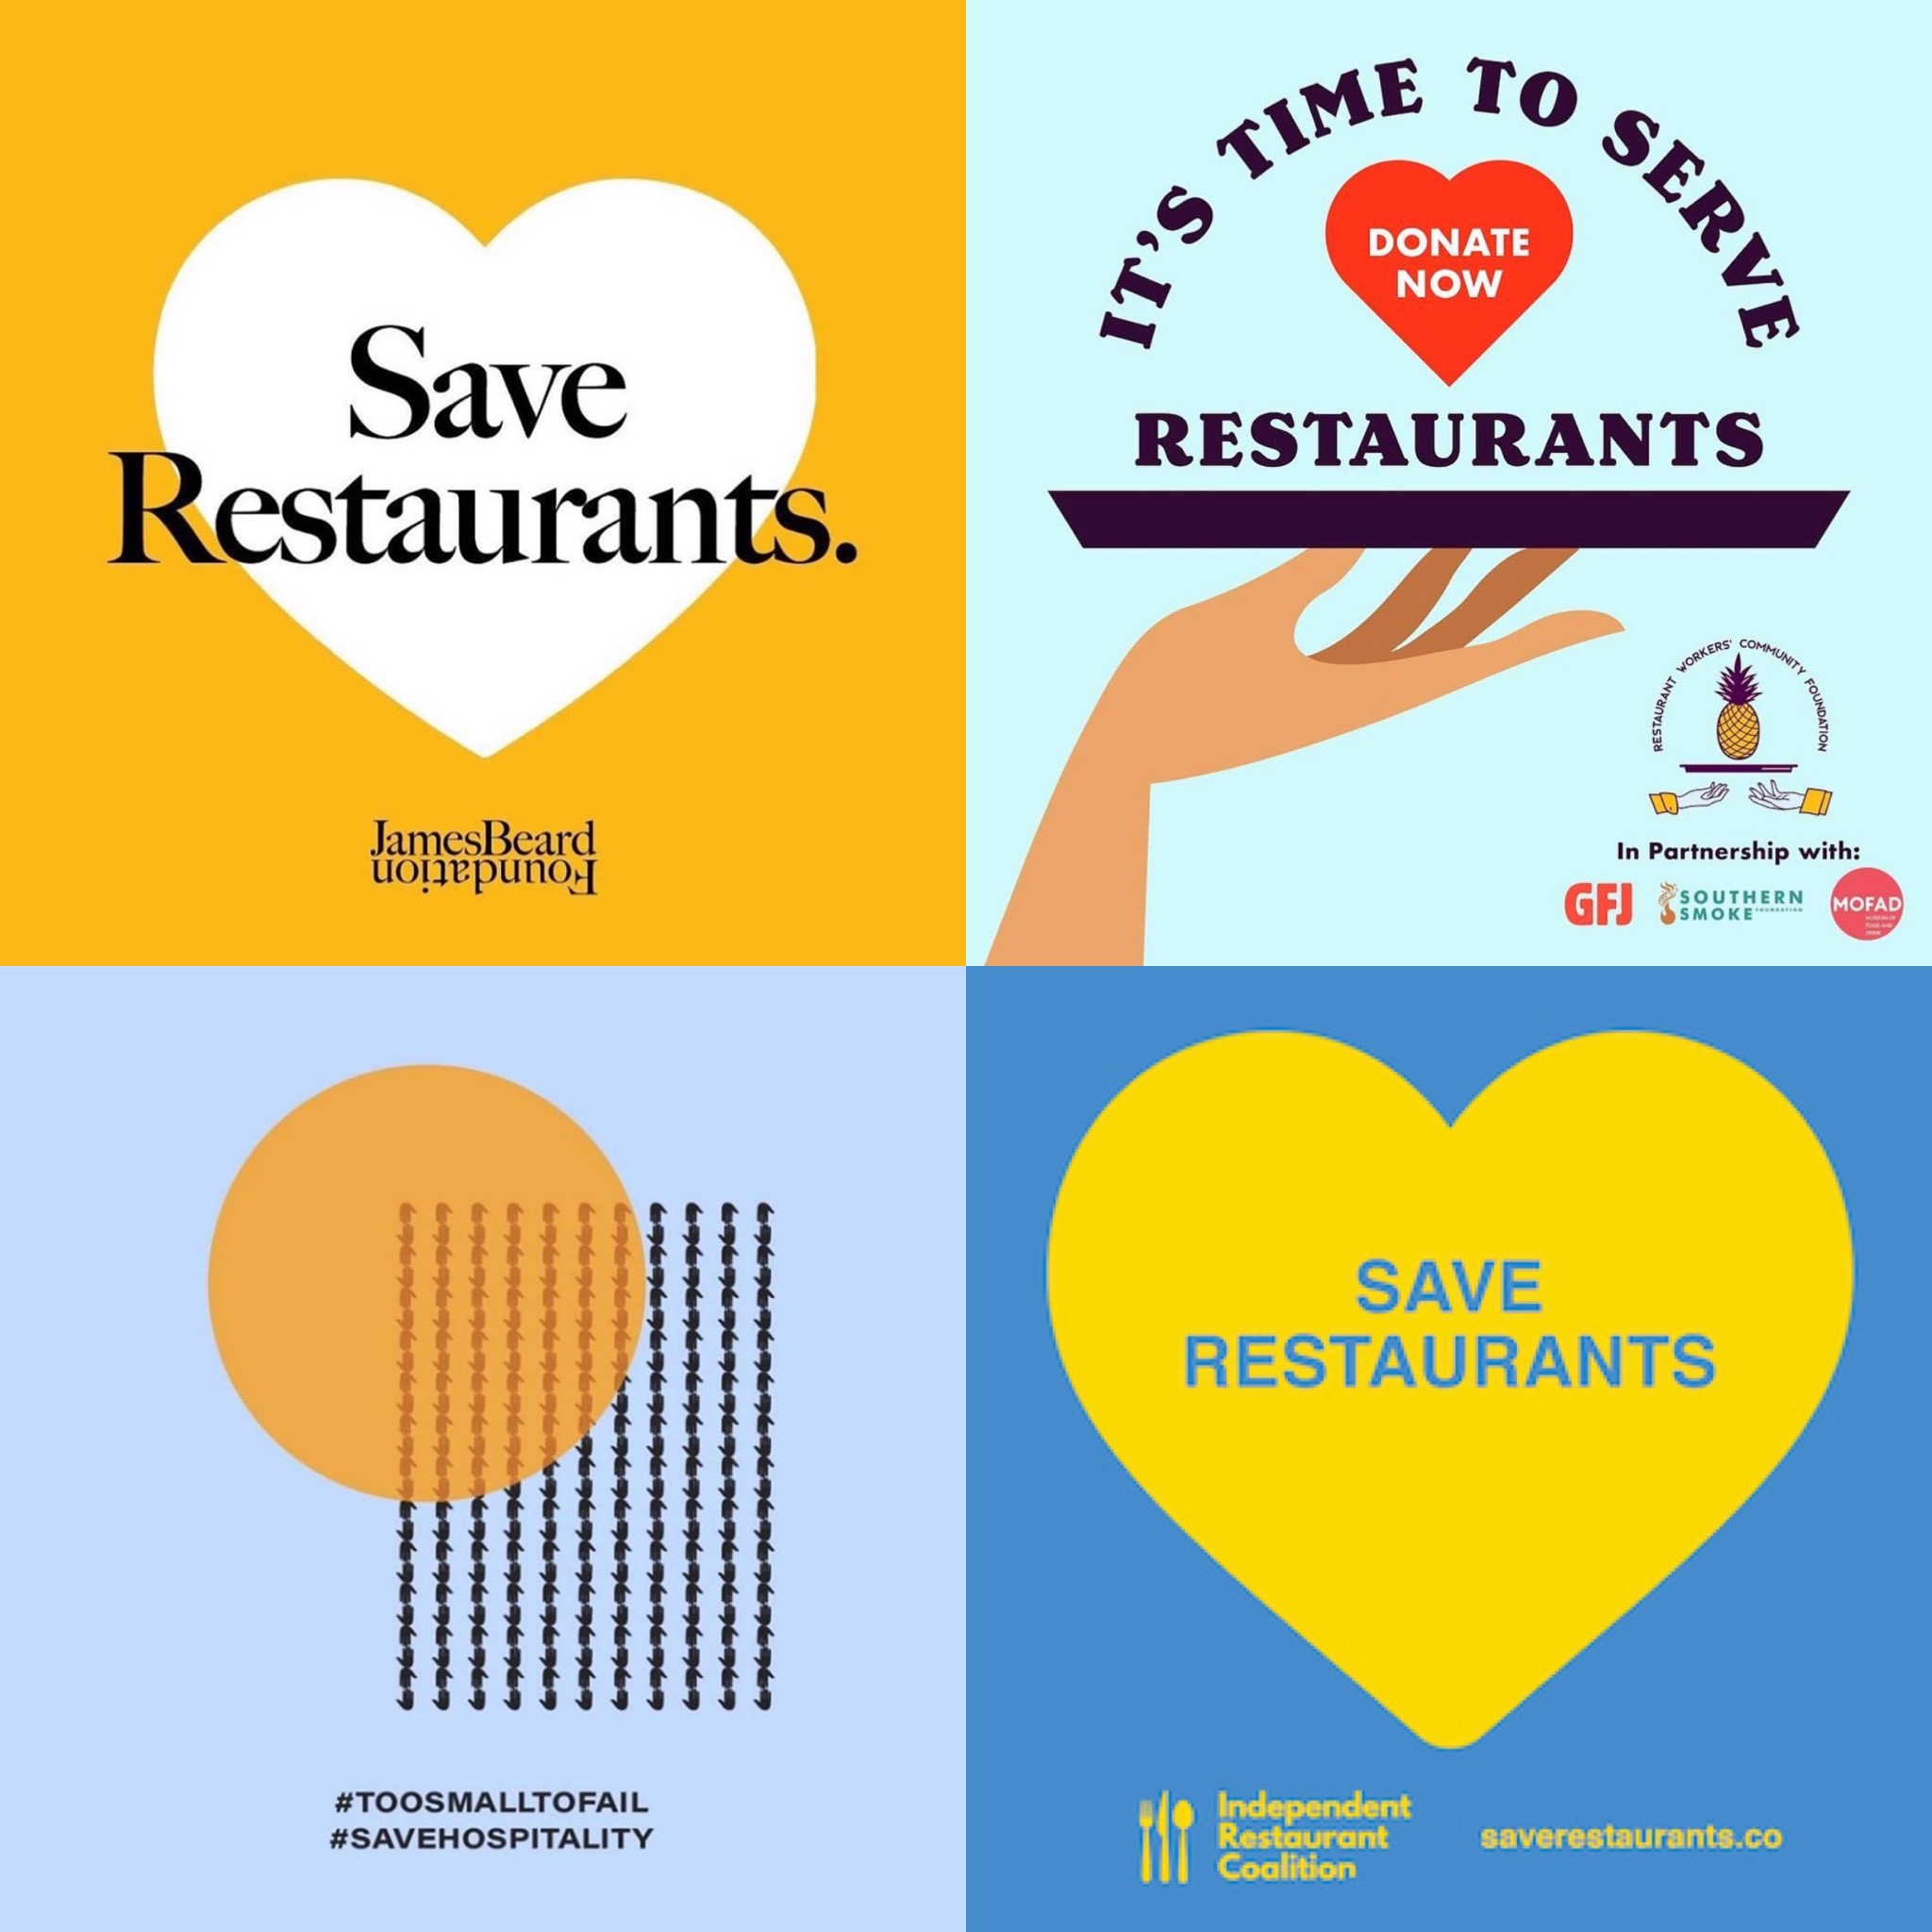 Restaurant relief funds and campaigns